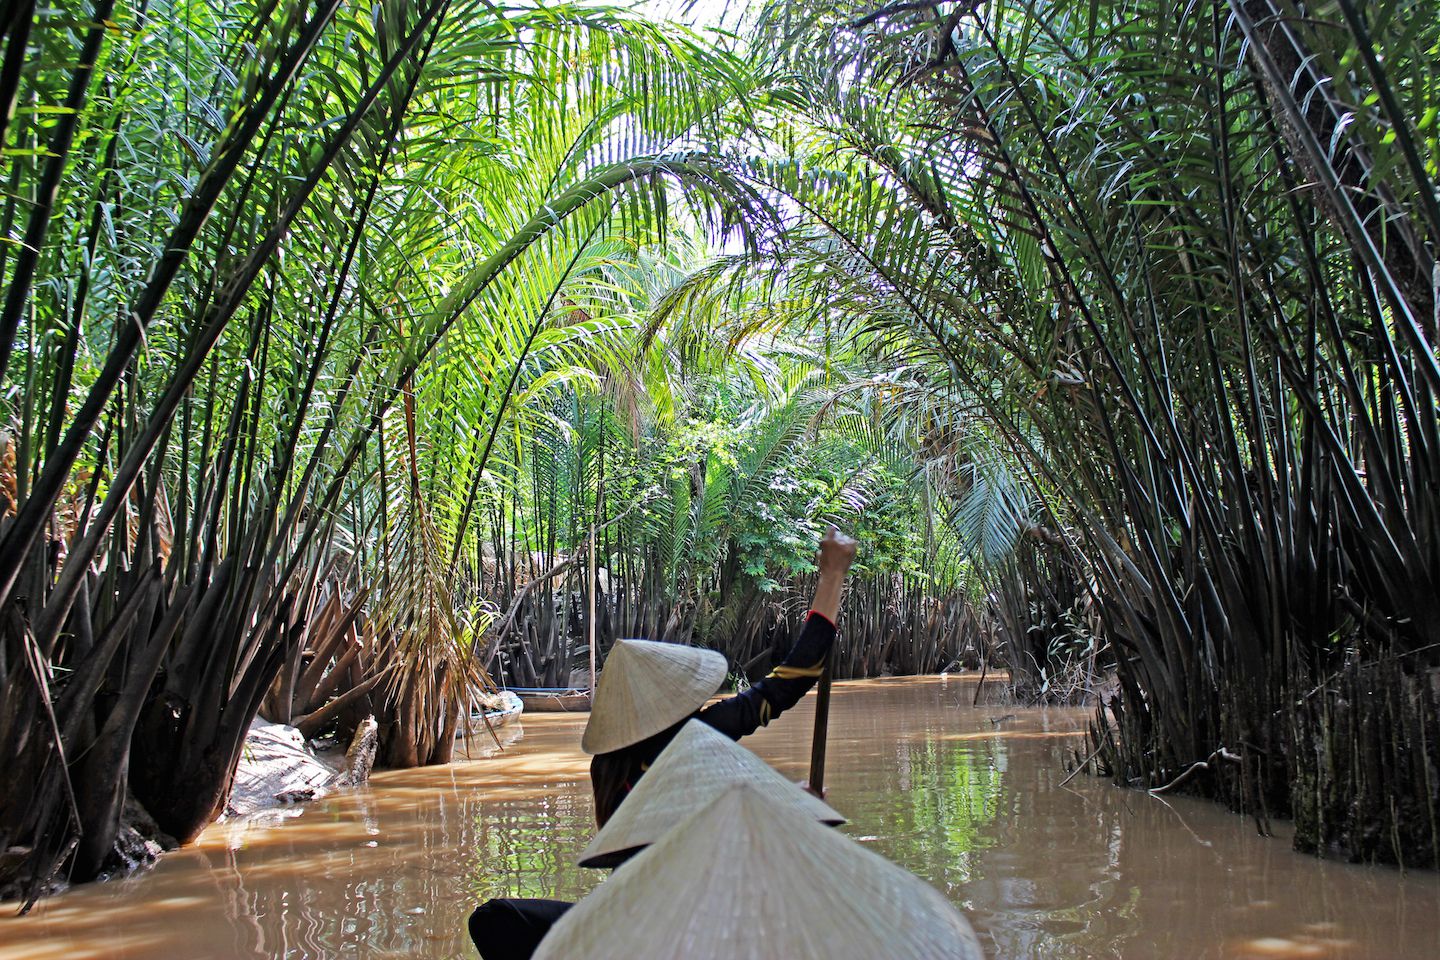 One of the coolest experiences in the Mekong Delta